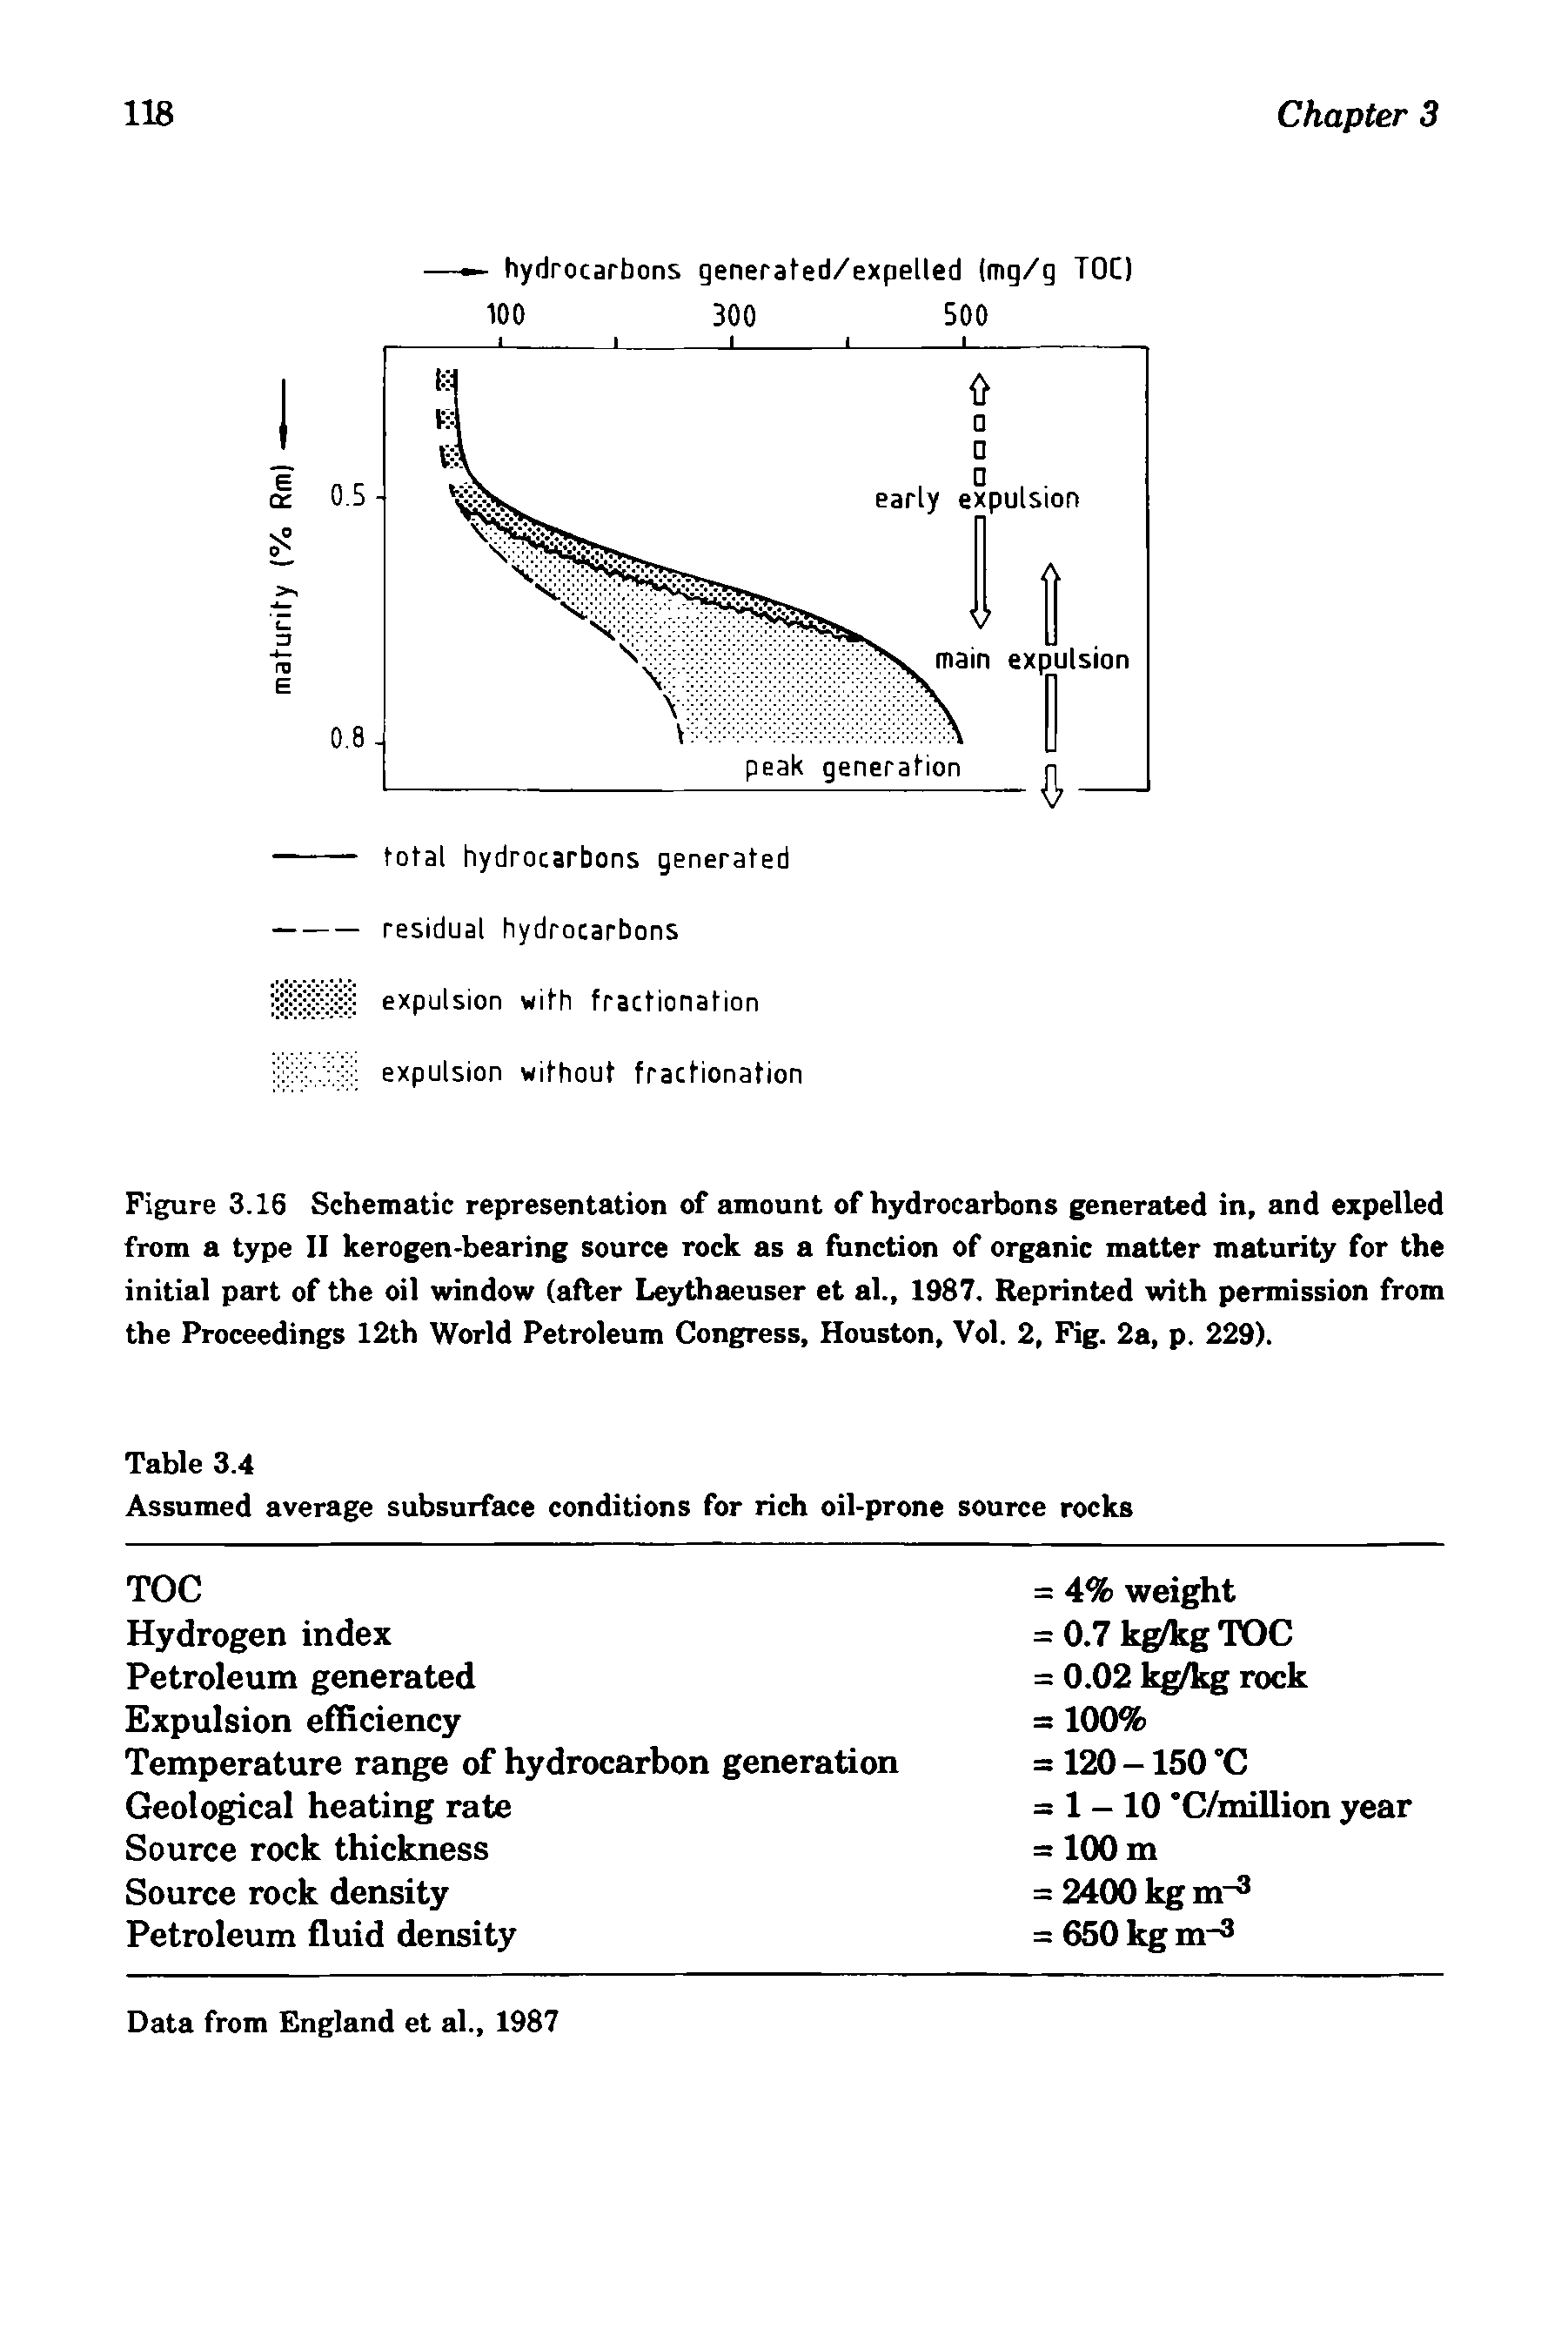 Figure 3.16 Schematic representation of amount of hydrocarbons generated in, and expelled from a type II kerogen-bearing source rock as a function of organic matter maturity for the initial part of the oil window (after Leythaeuser et al., 1987. Reprinted with permission from the Proceedings 12th World Petroleum Congress, Houston, Vol. 2, Fig. 2a, p. 229).